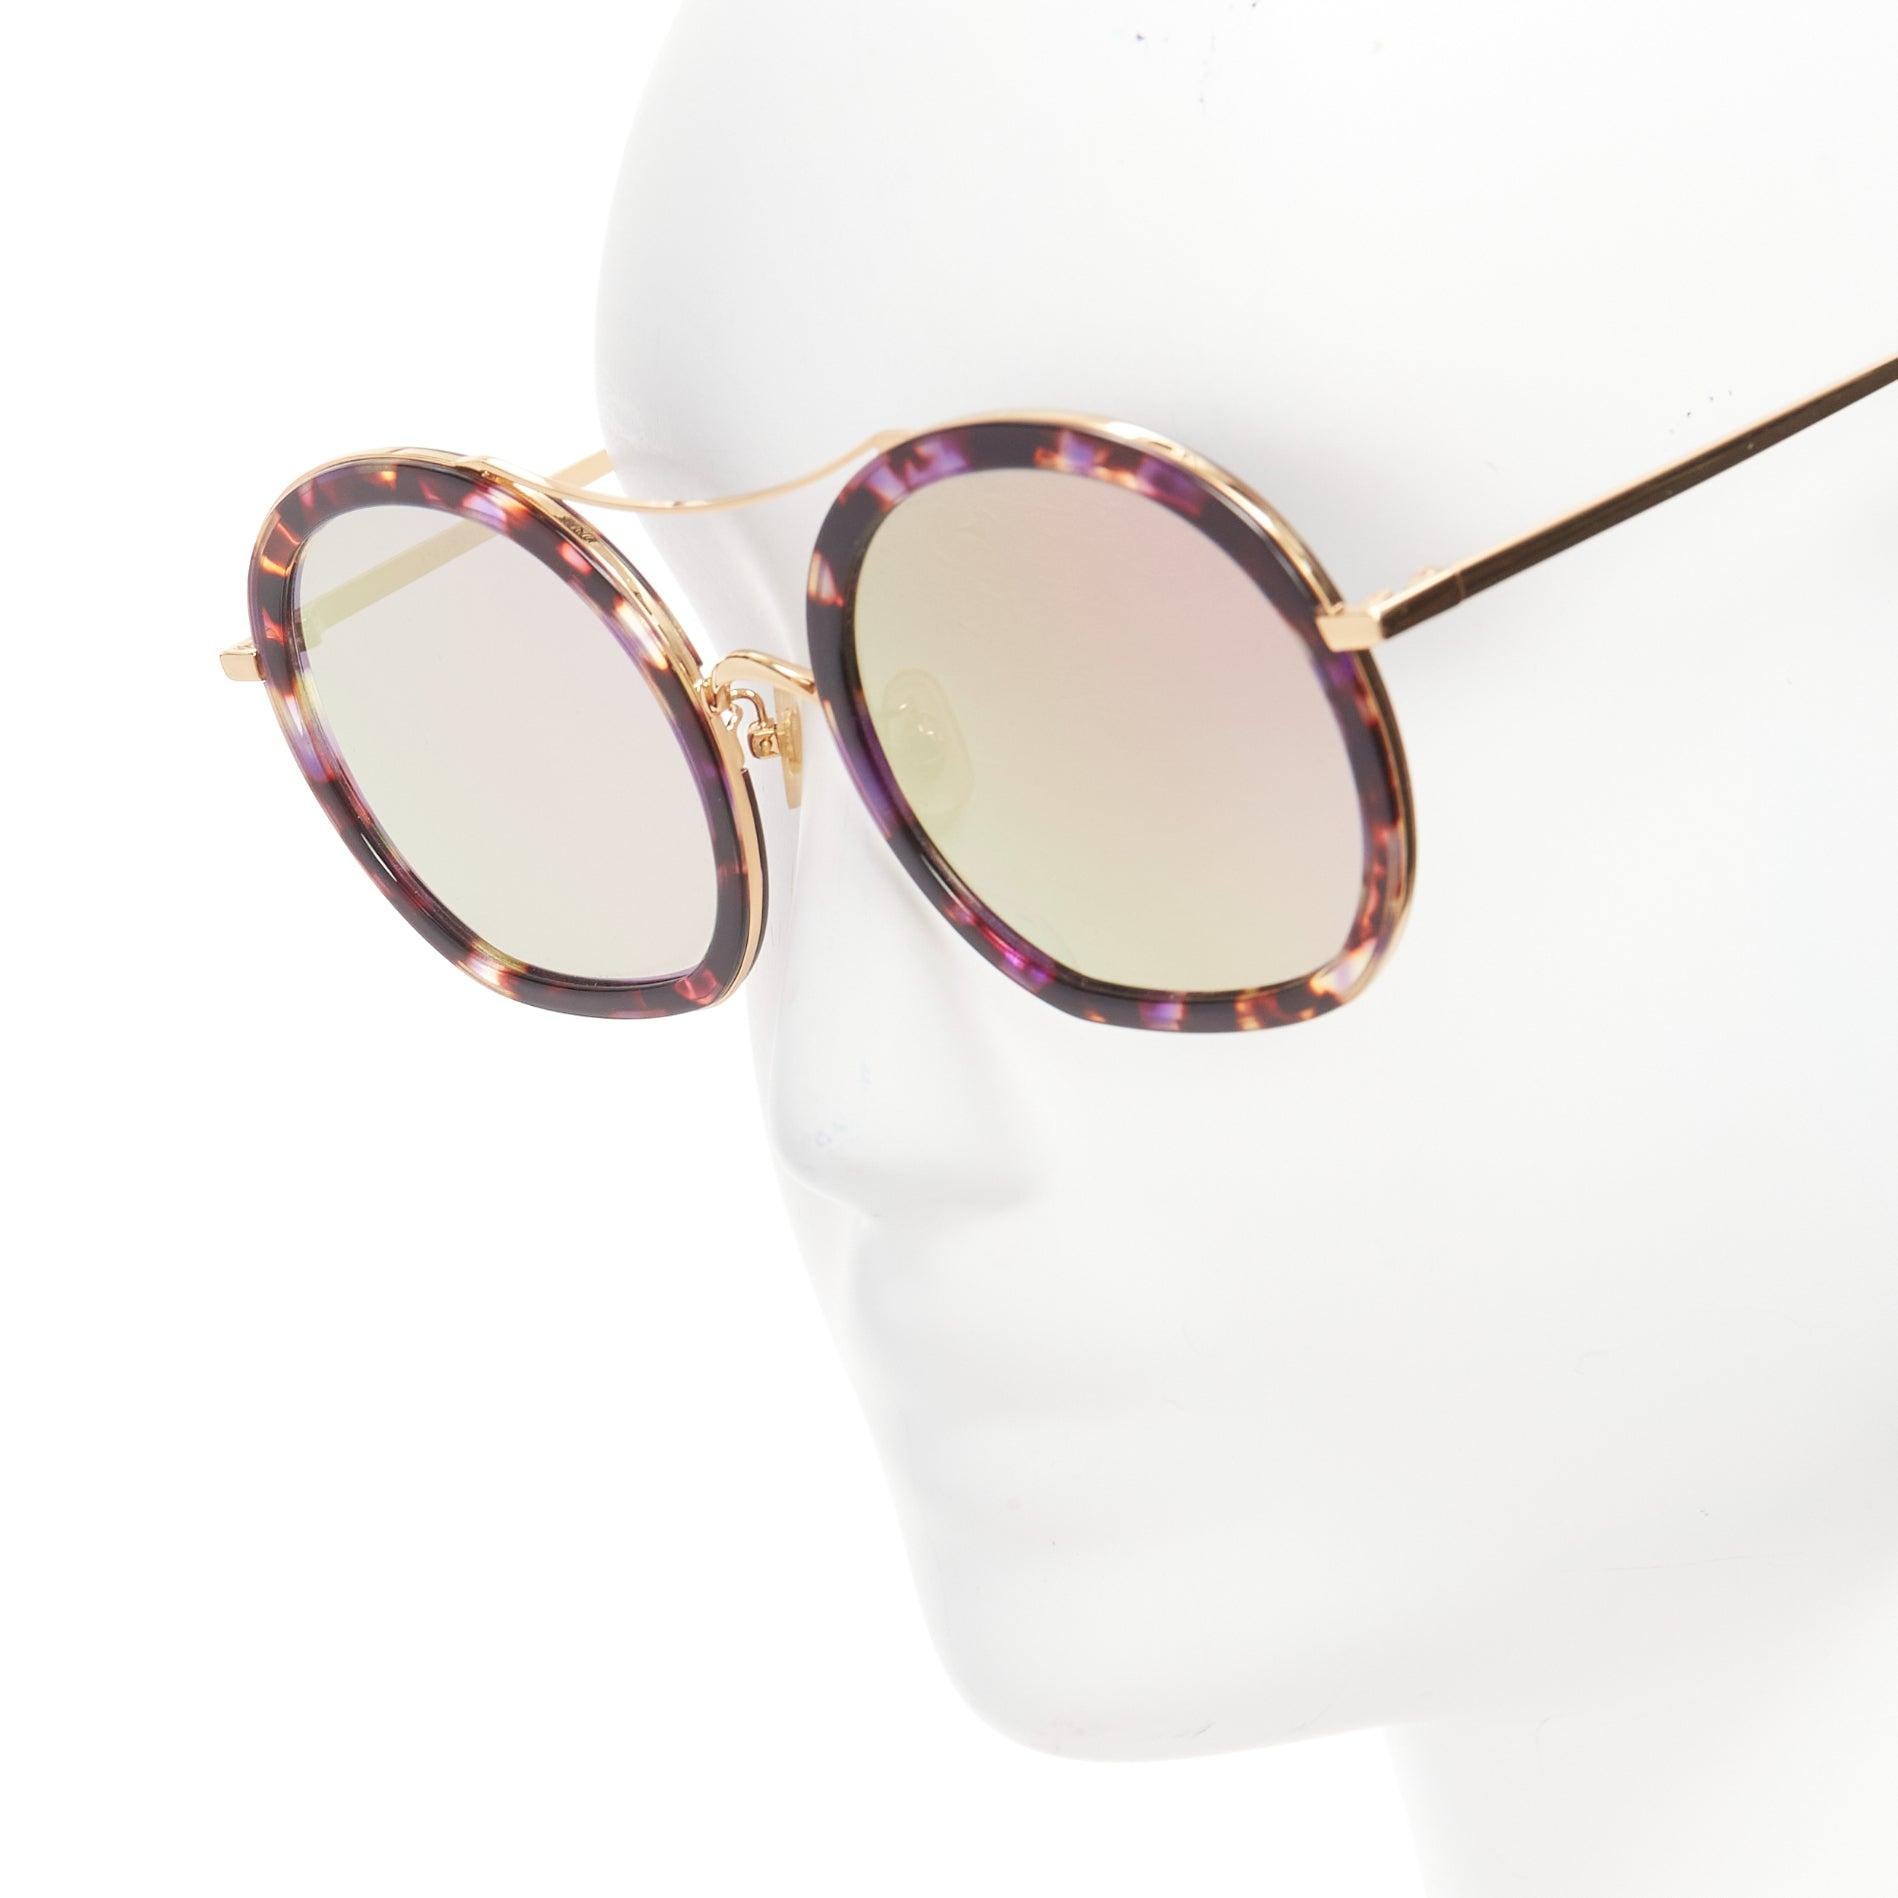 STEPHANE CHRISTIAN Drugduck brown tortoise purple reflective round sunglasses
Reference: NKLL/A00134
Brand: Stephane Christian
Model: Drugduck
Material: Plastic
Color: Purple, Brown
Pattern: Abstract

CONDITION:
Condition: Excellent, this item was